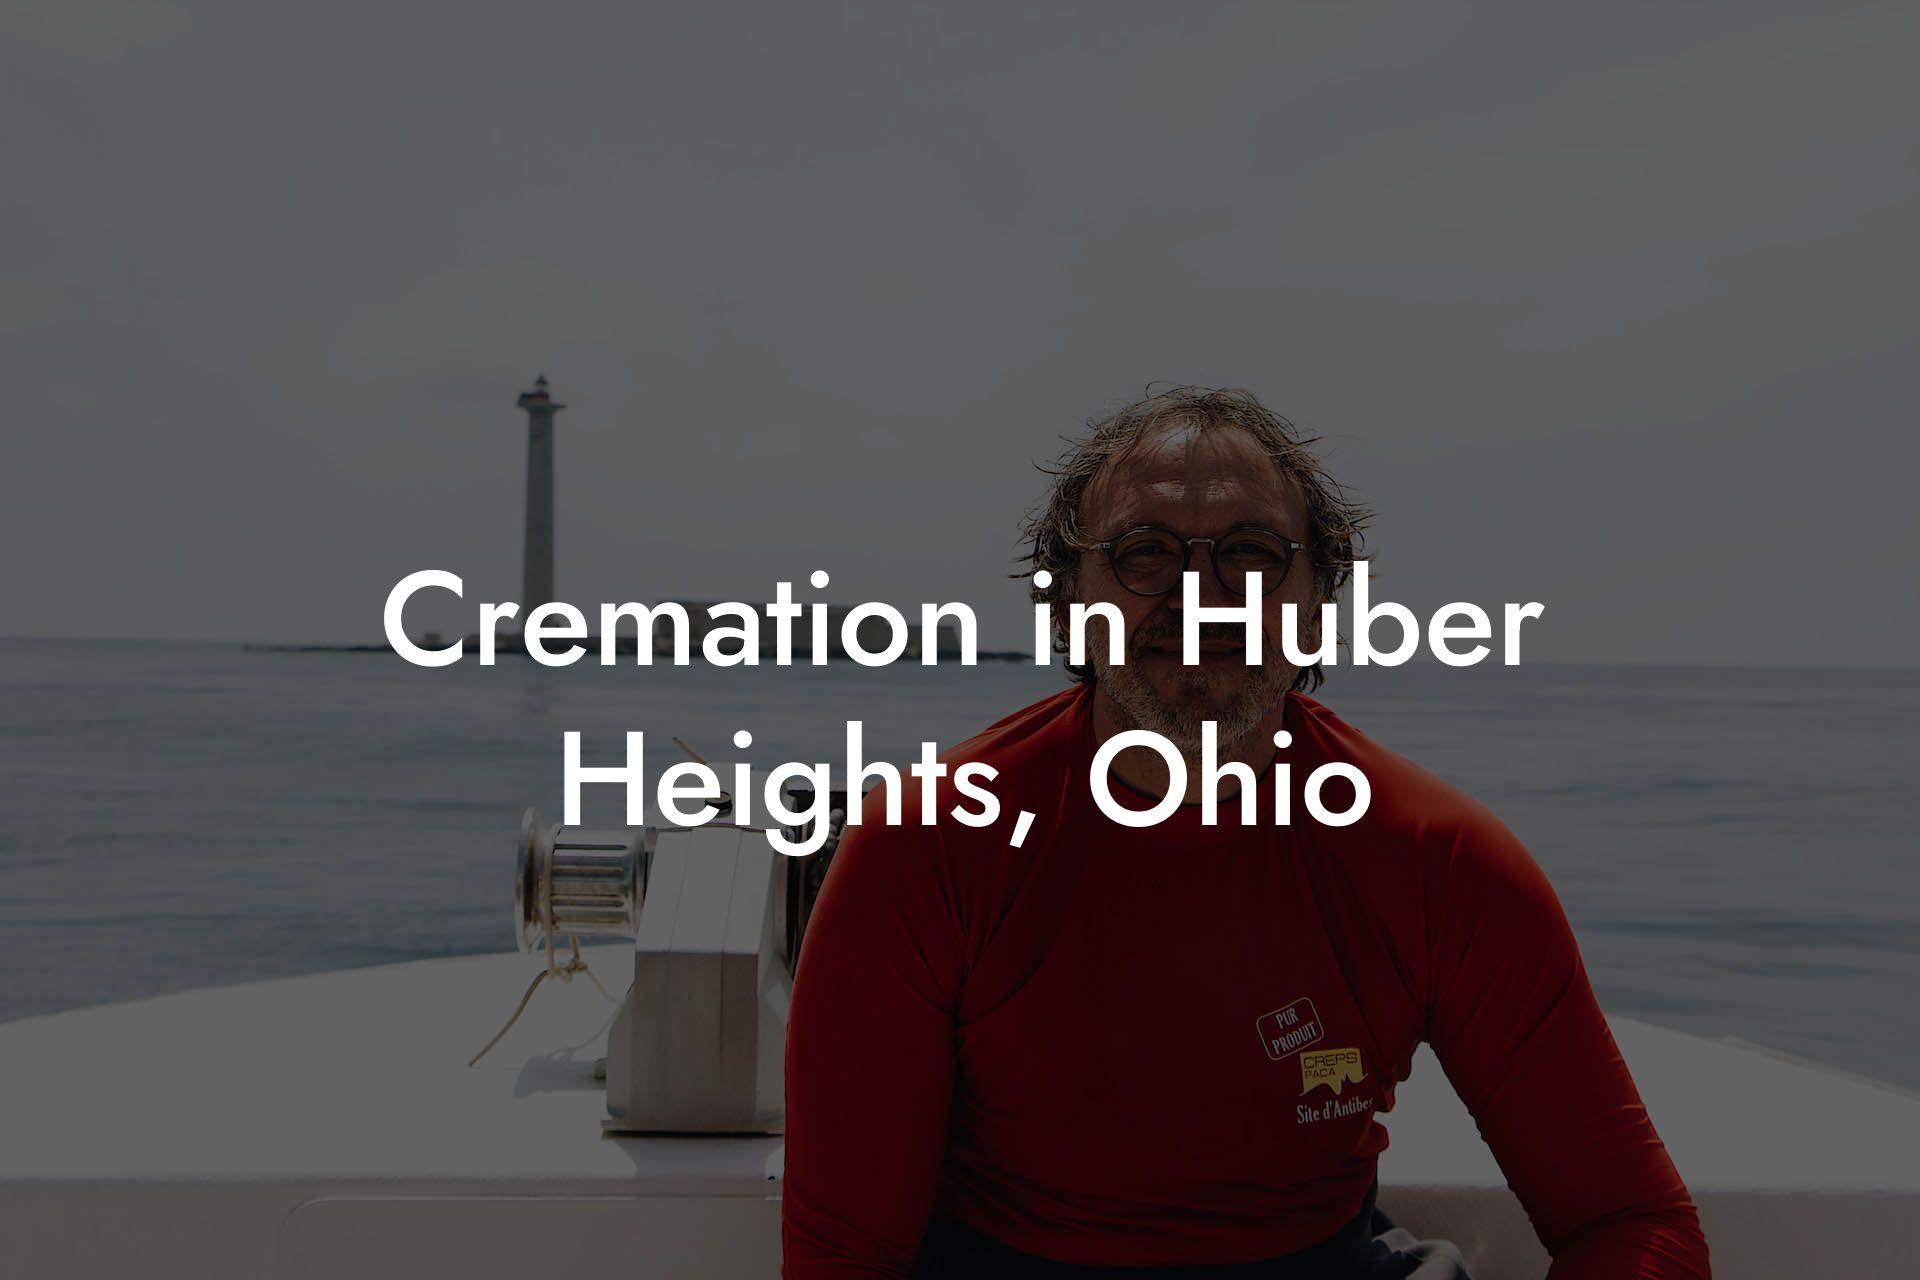 Cremation in Huber Heights, Ohio